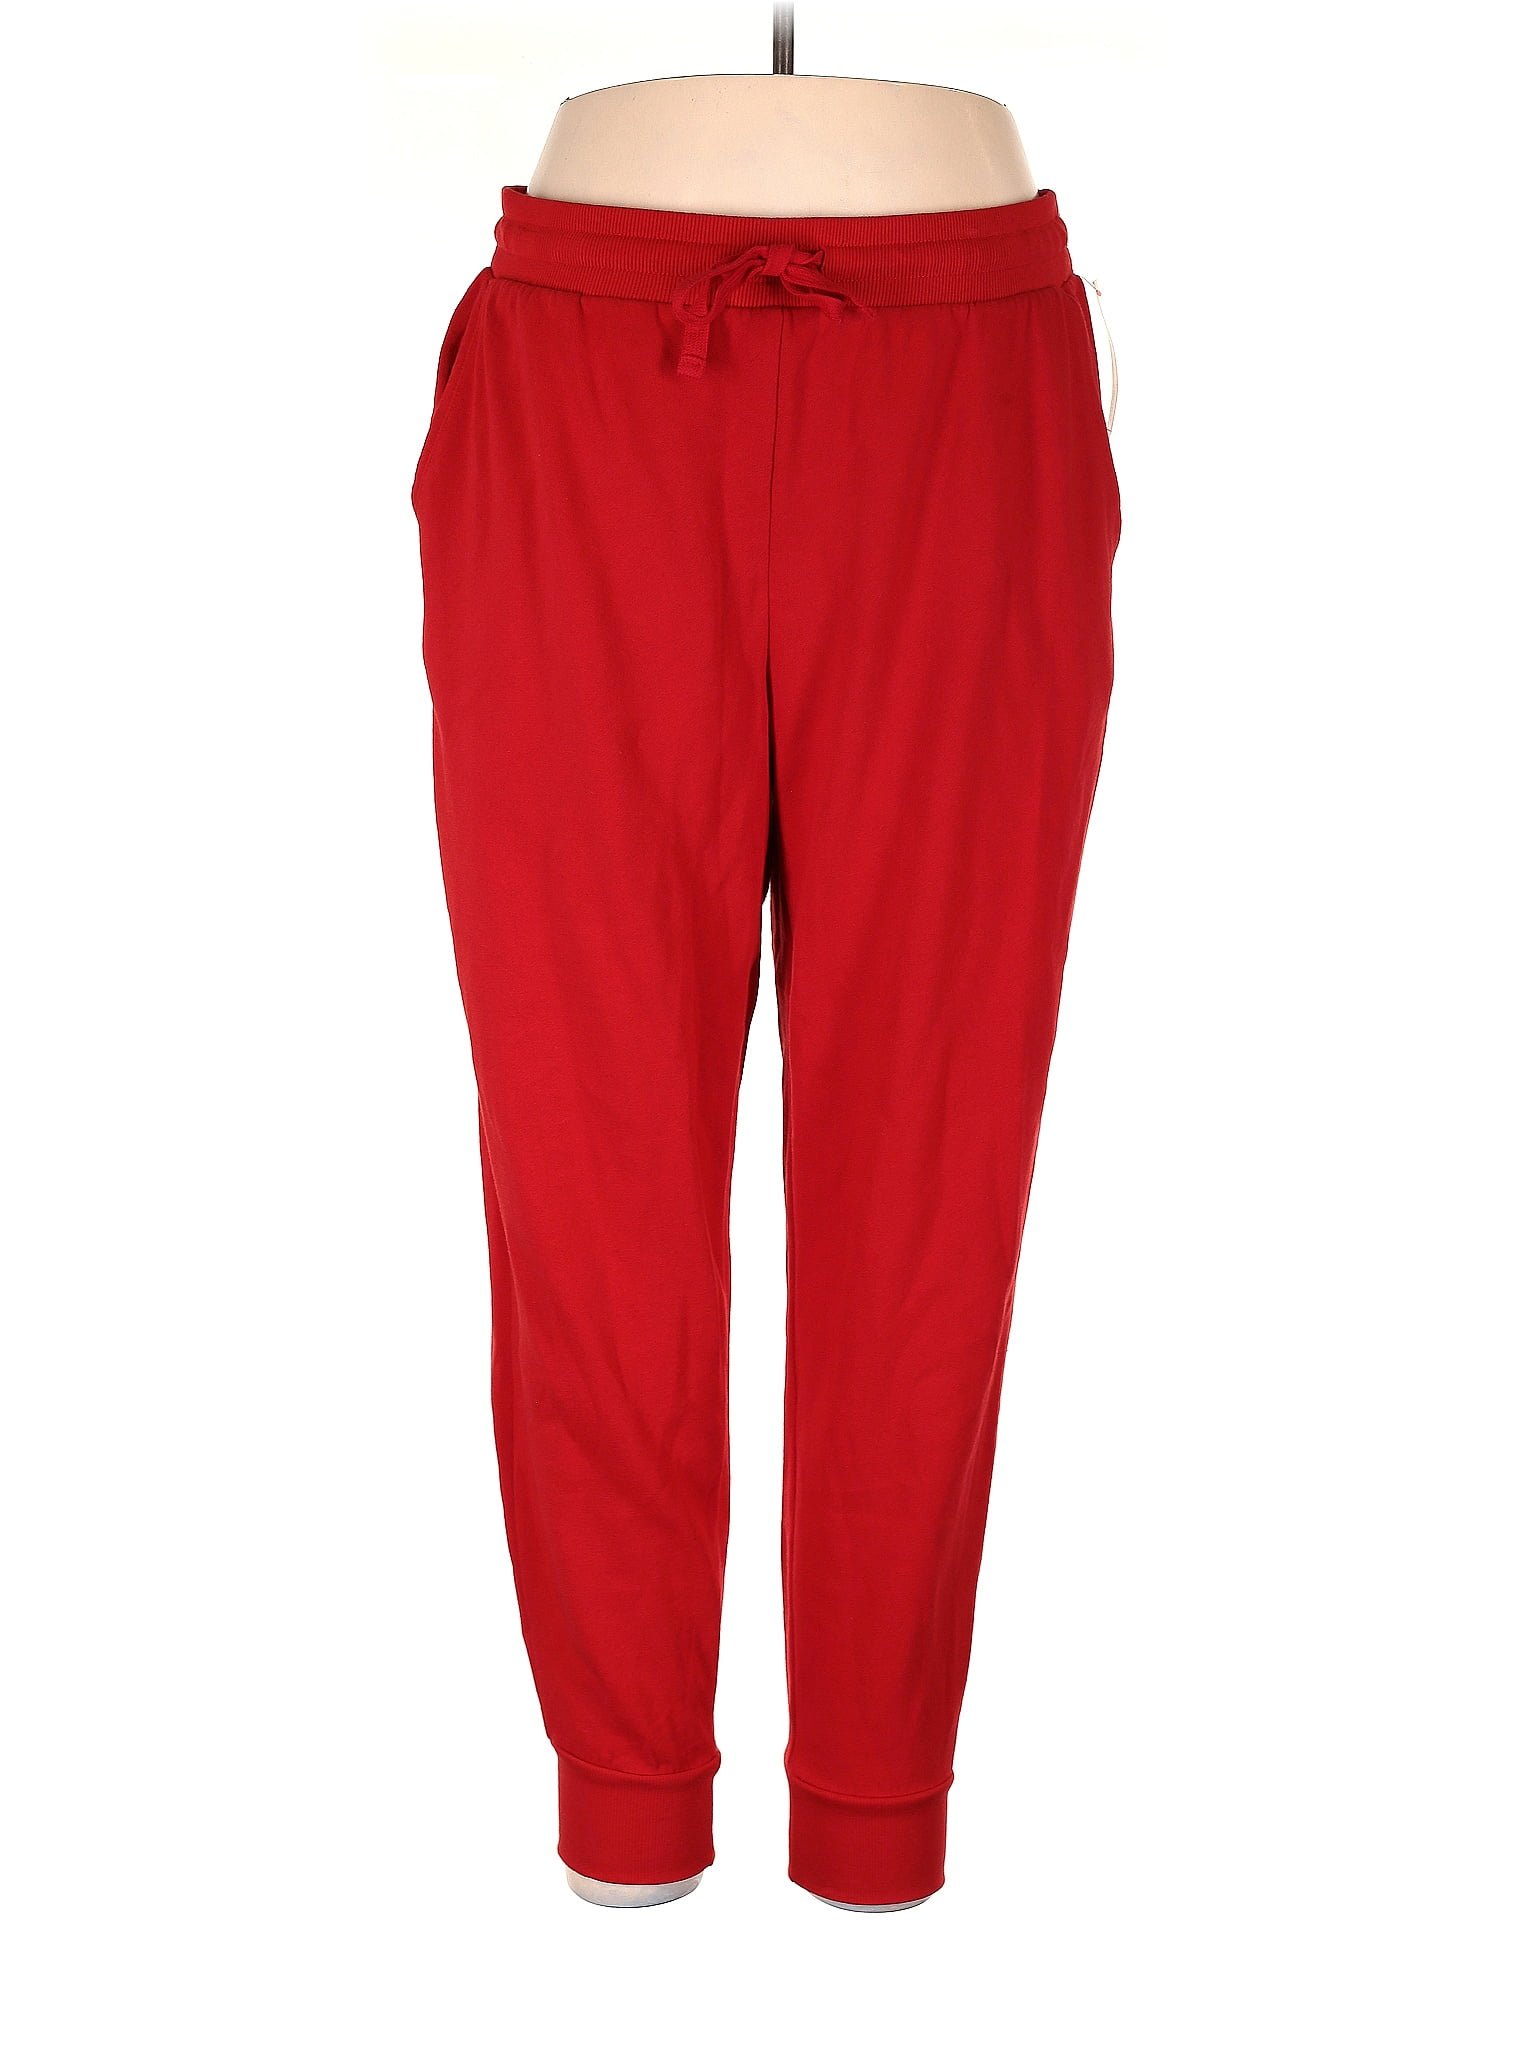 colsie Solid Red Sweatpants Size XL - 25% off